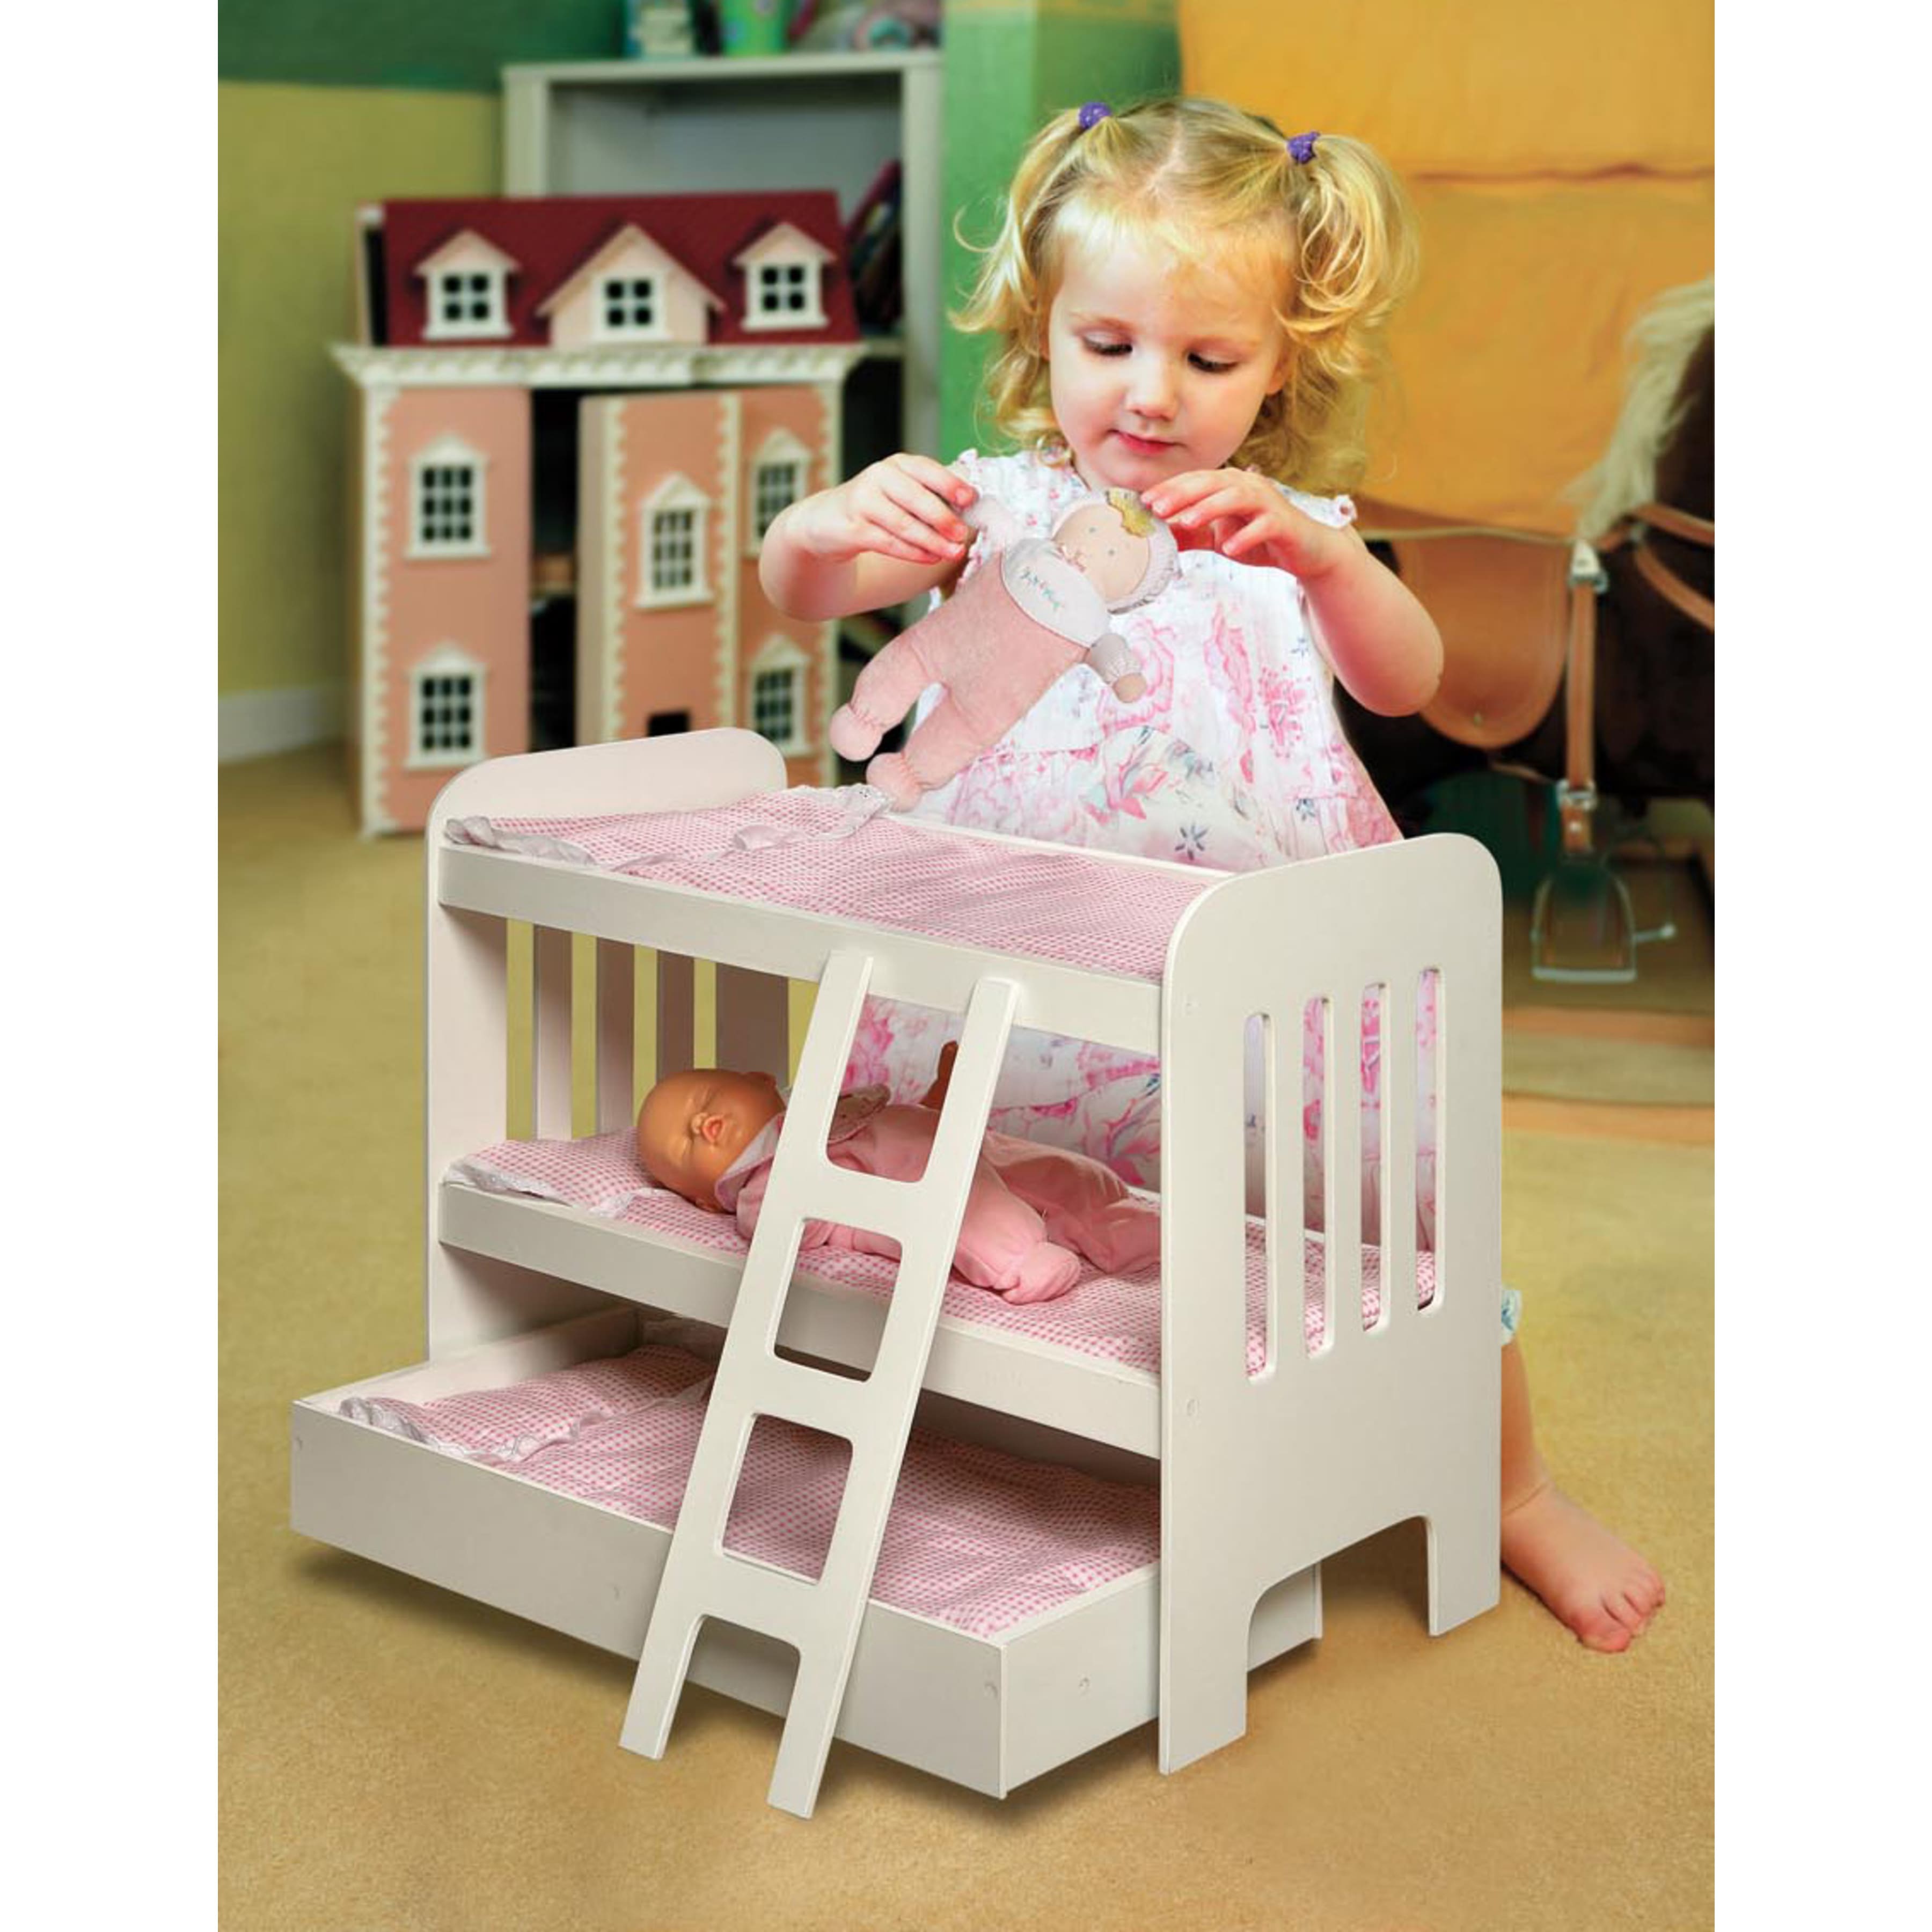 GIRLS KIDS BABY DOLL PINK BUNK BED WITH ACCESSORIES FOR BIRTHDAYS GIFT XMAS TOYS 